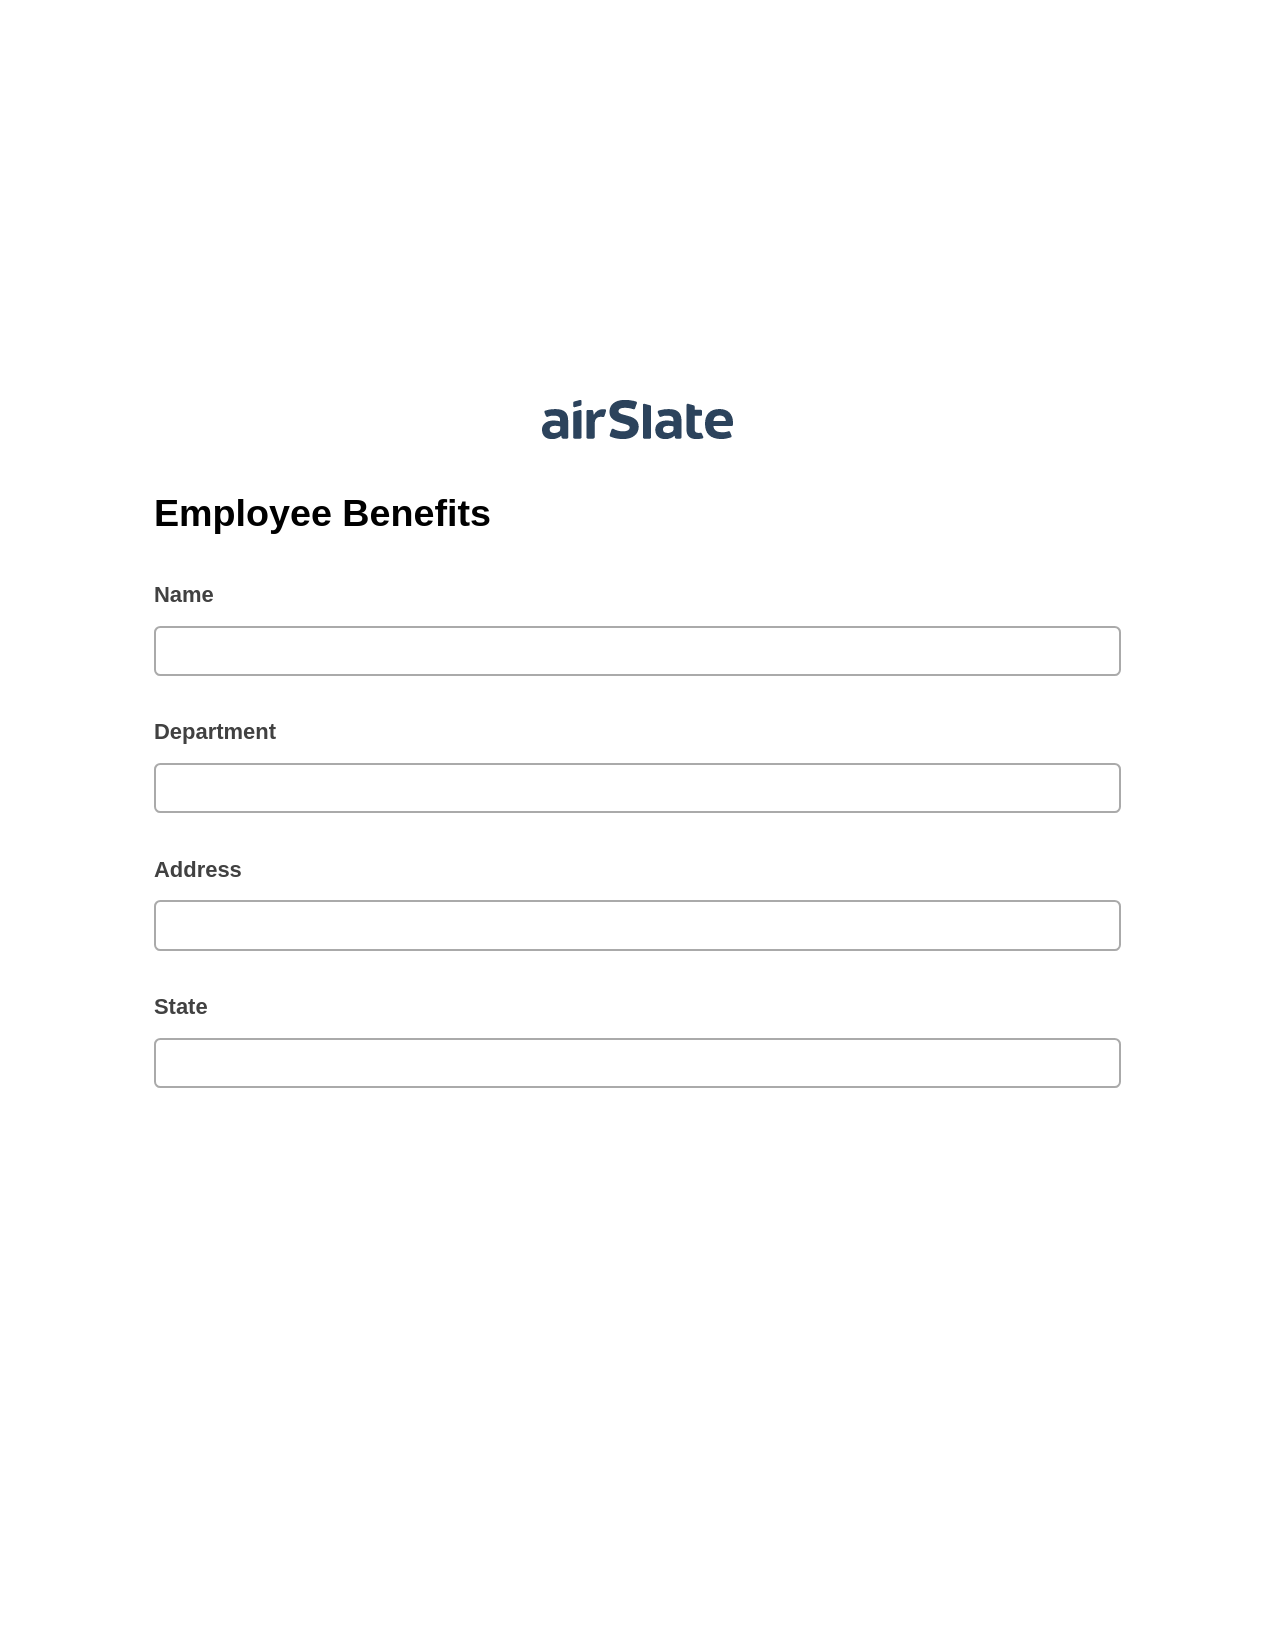 Employee Benefits Pre-fill from CSV File Bot, Create Slate every Google Sheet Update Bot, Export to Smartsheet